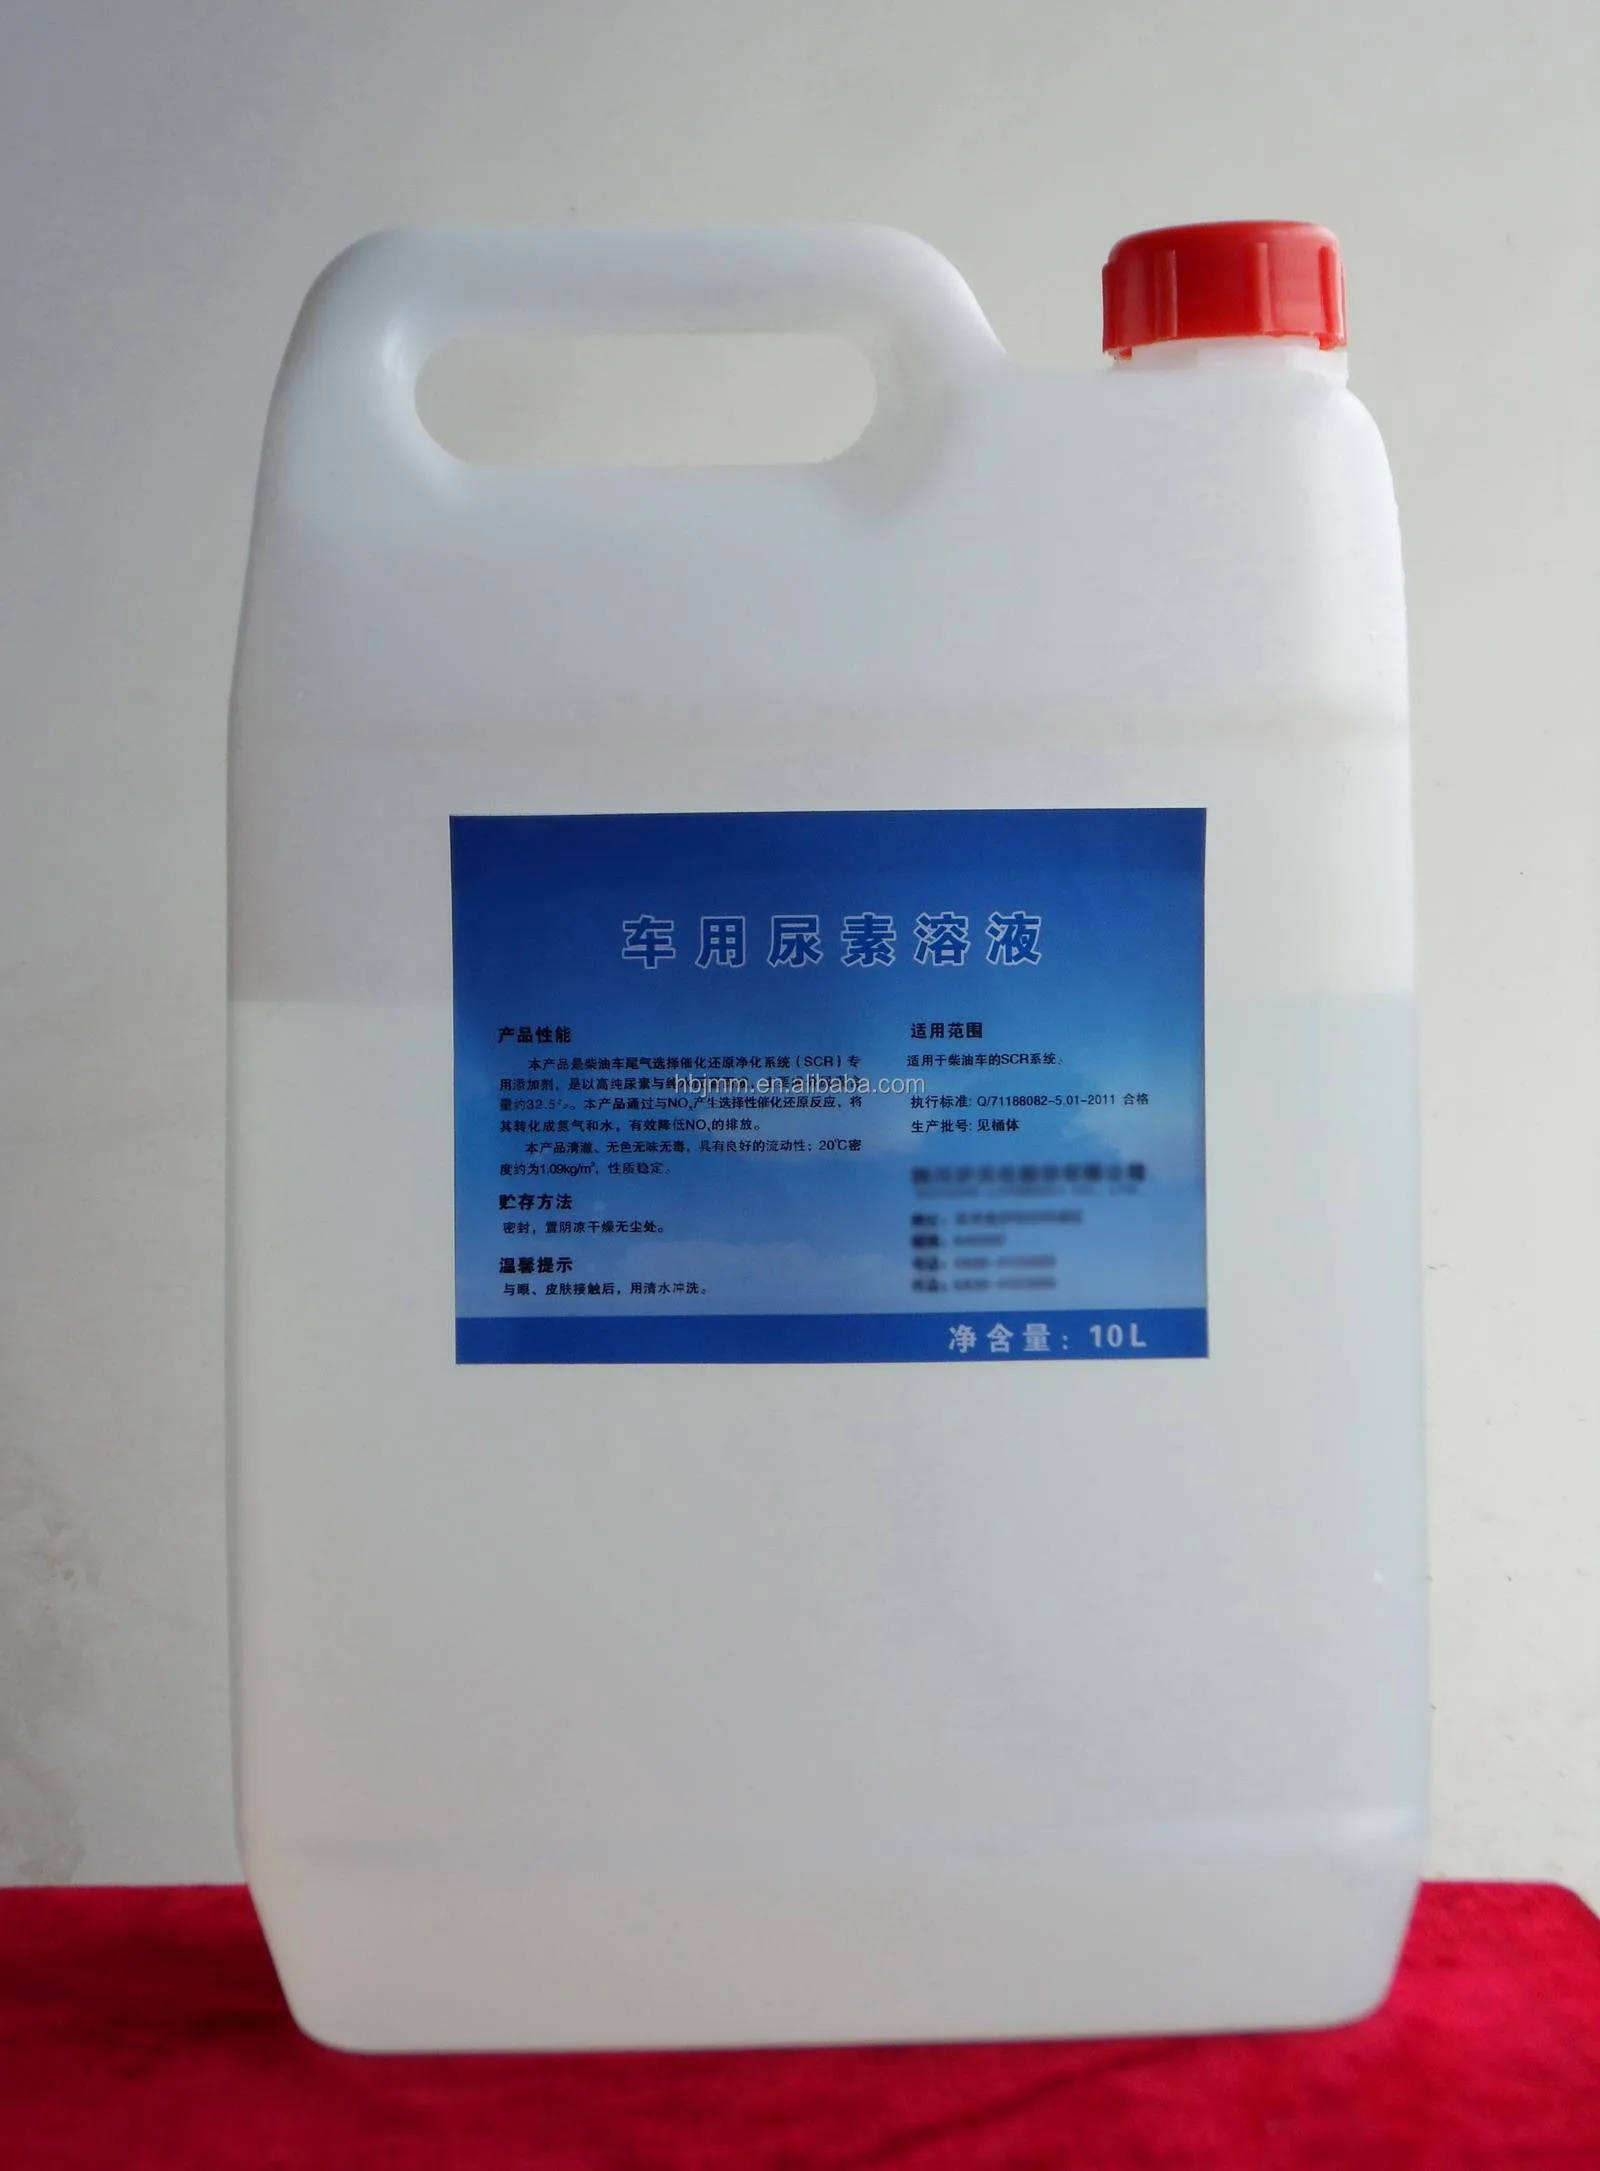 5L Adblue Diesel Exhaust Fluid, For Automotive, Packaging Size